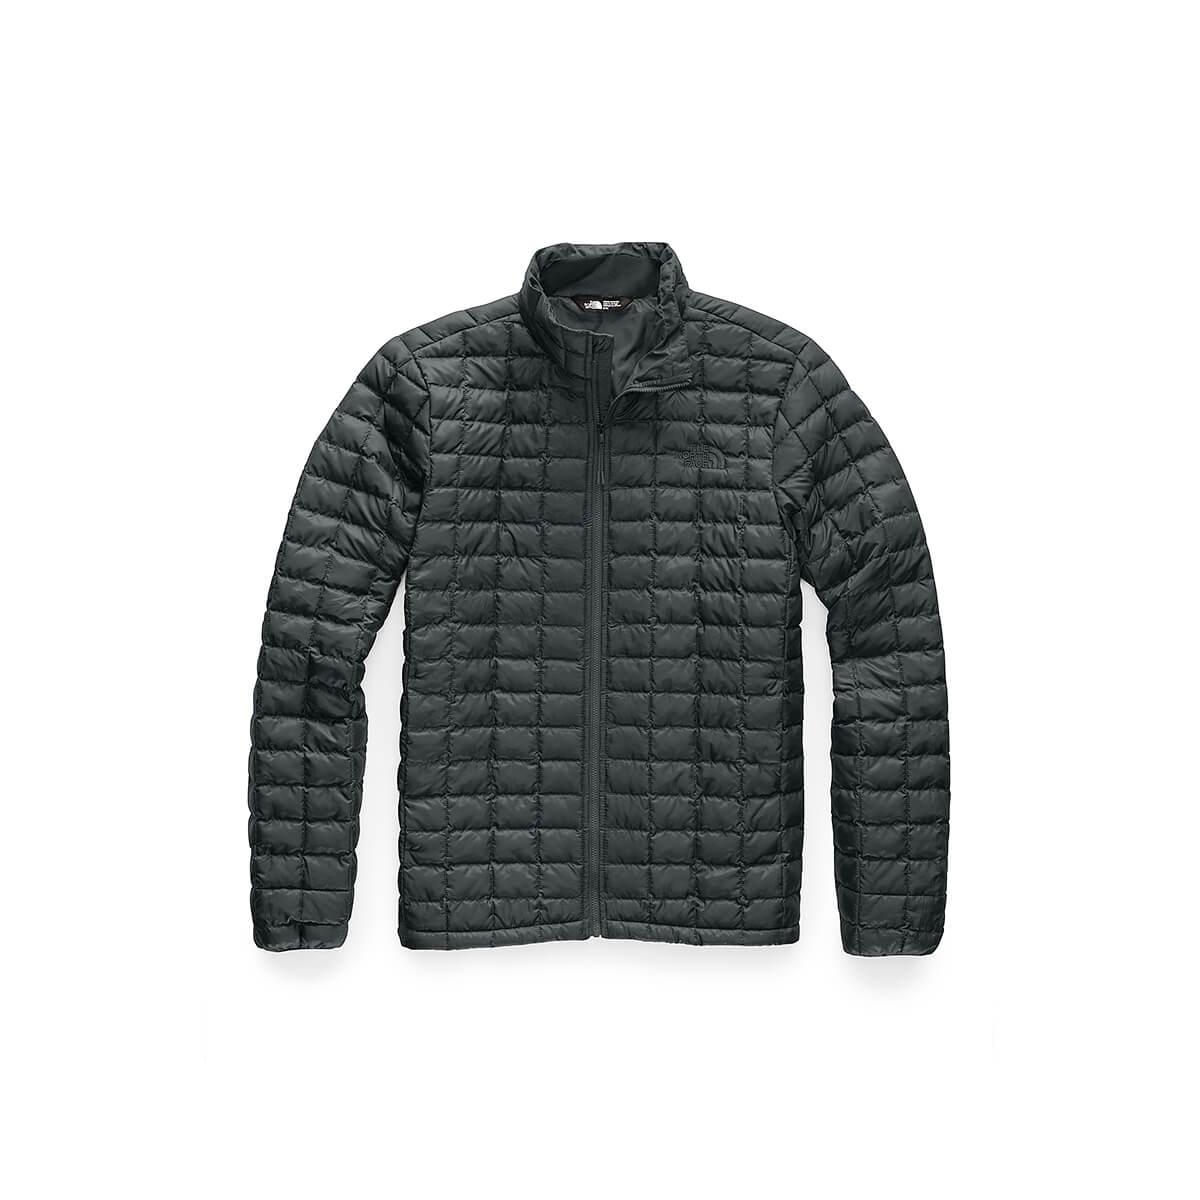 THE NORTH FACE | Men's Thermoball Eco Jacket